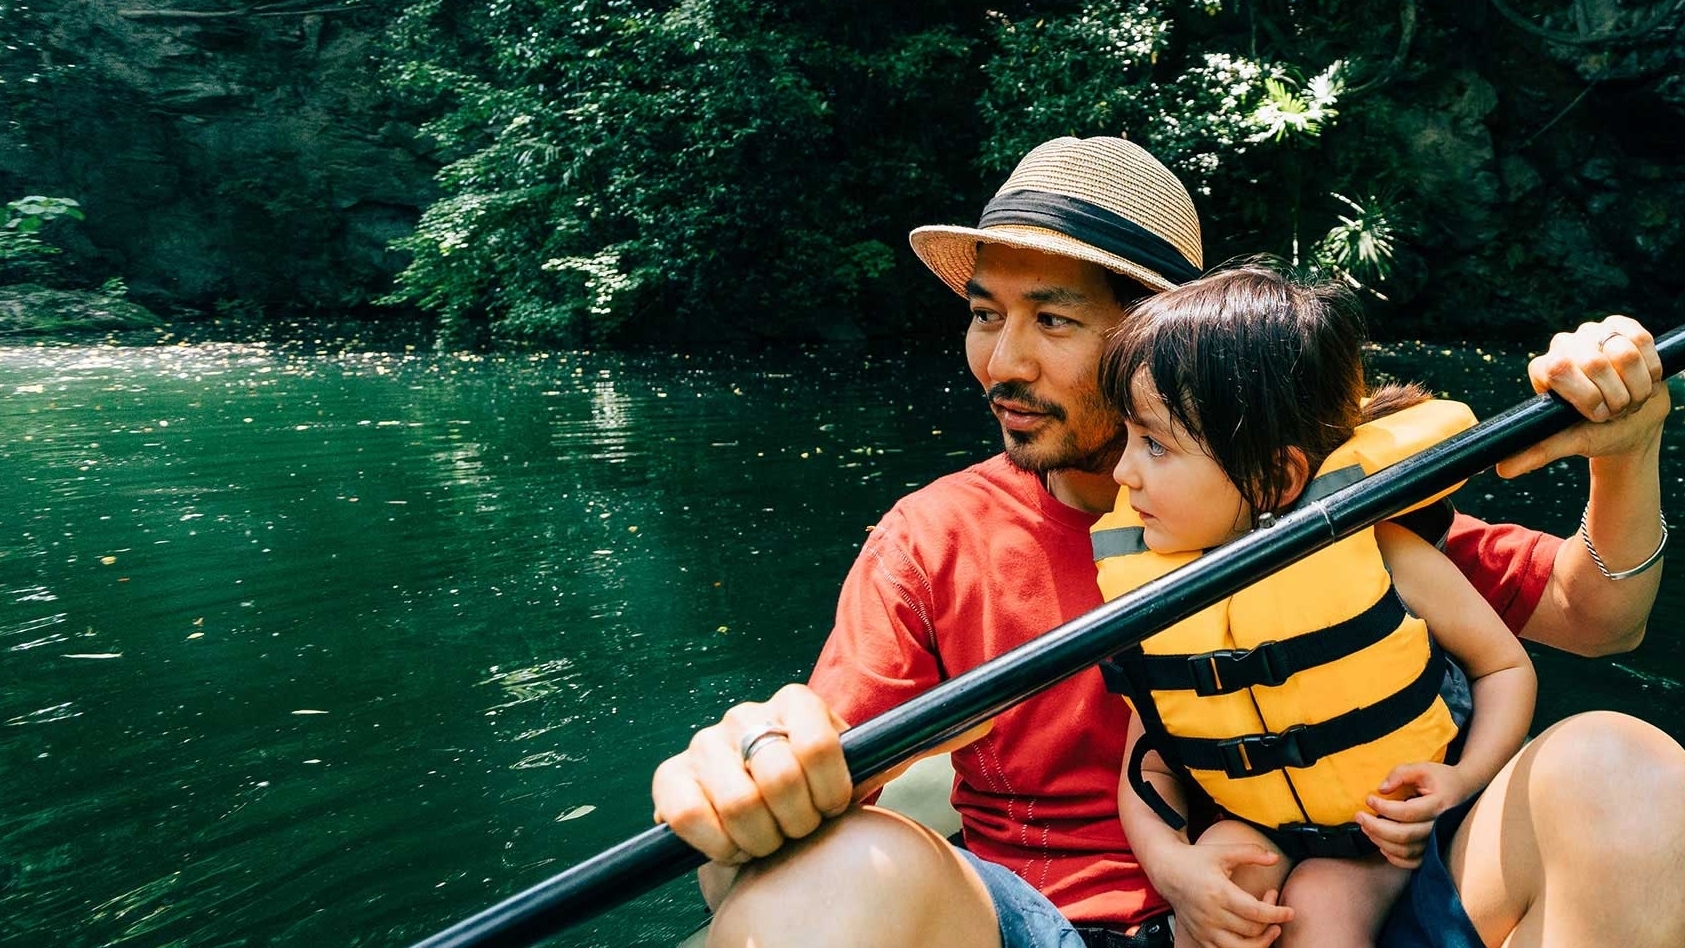 Image of a father and child kayaking